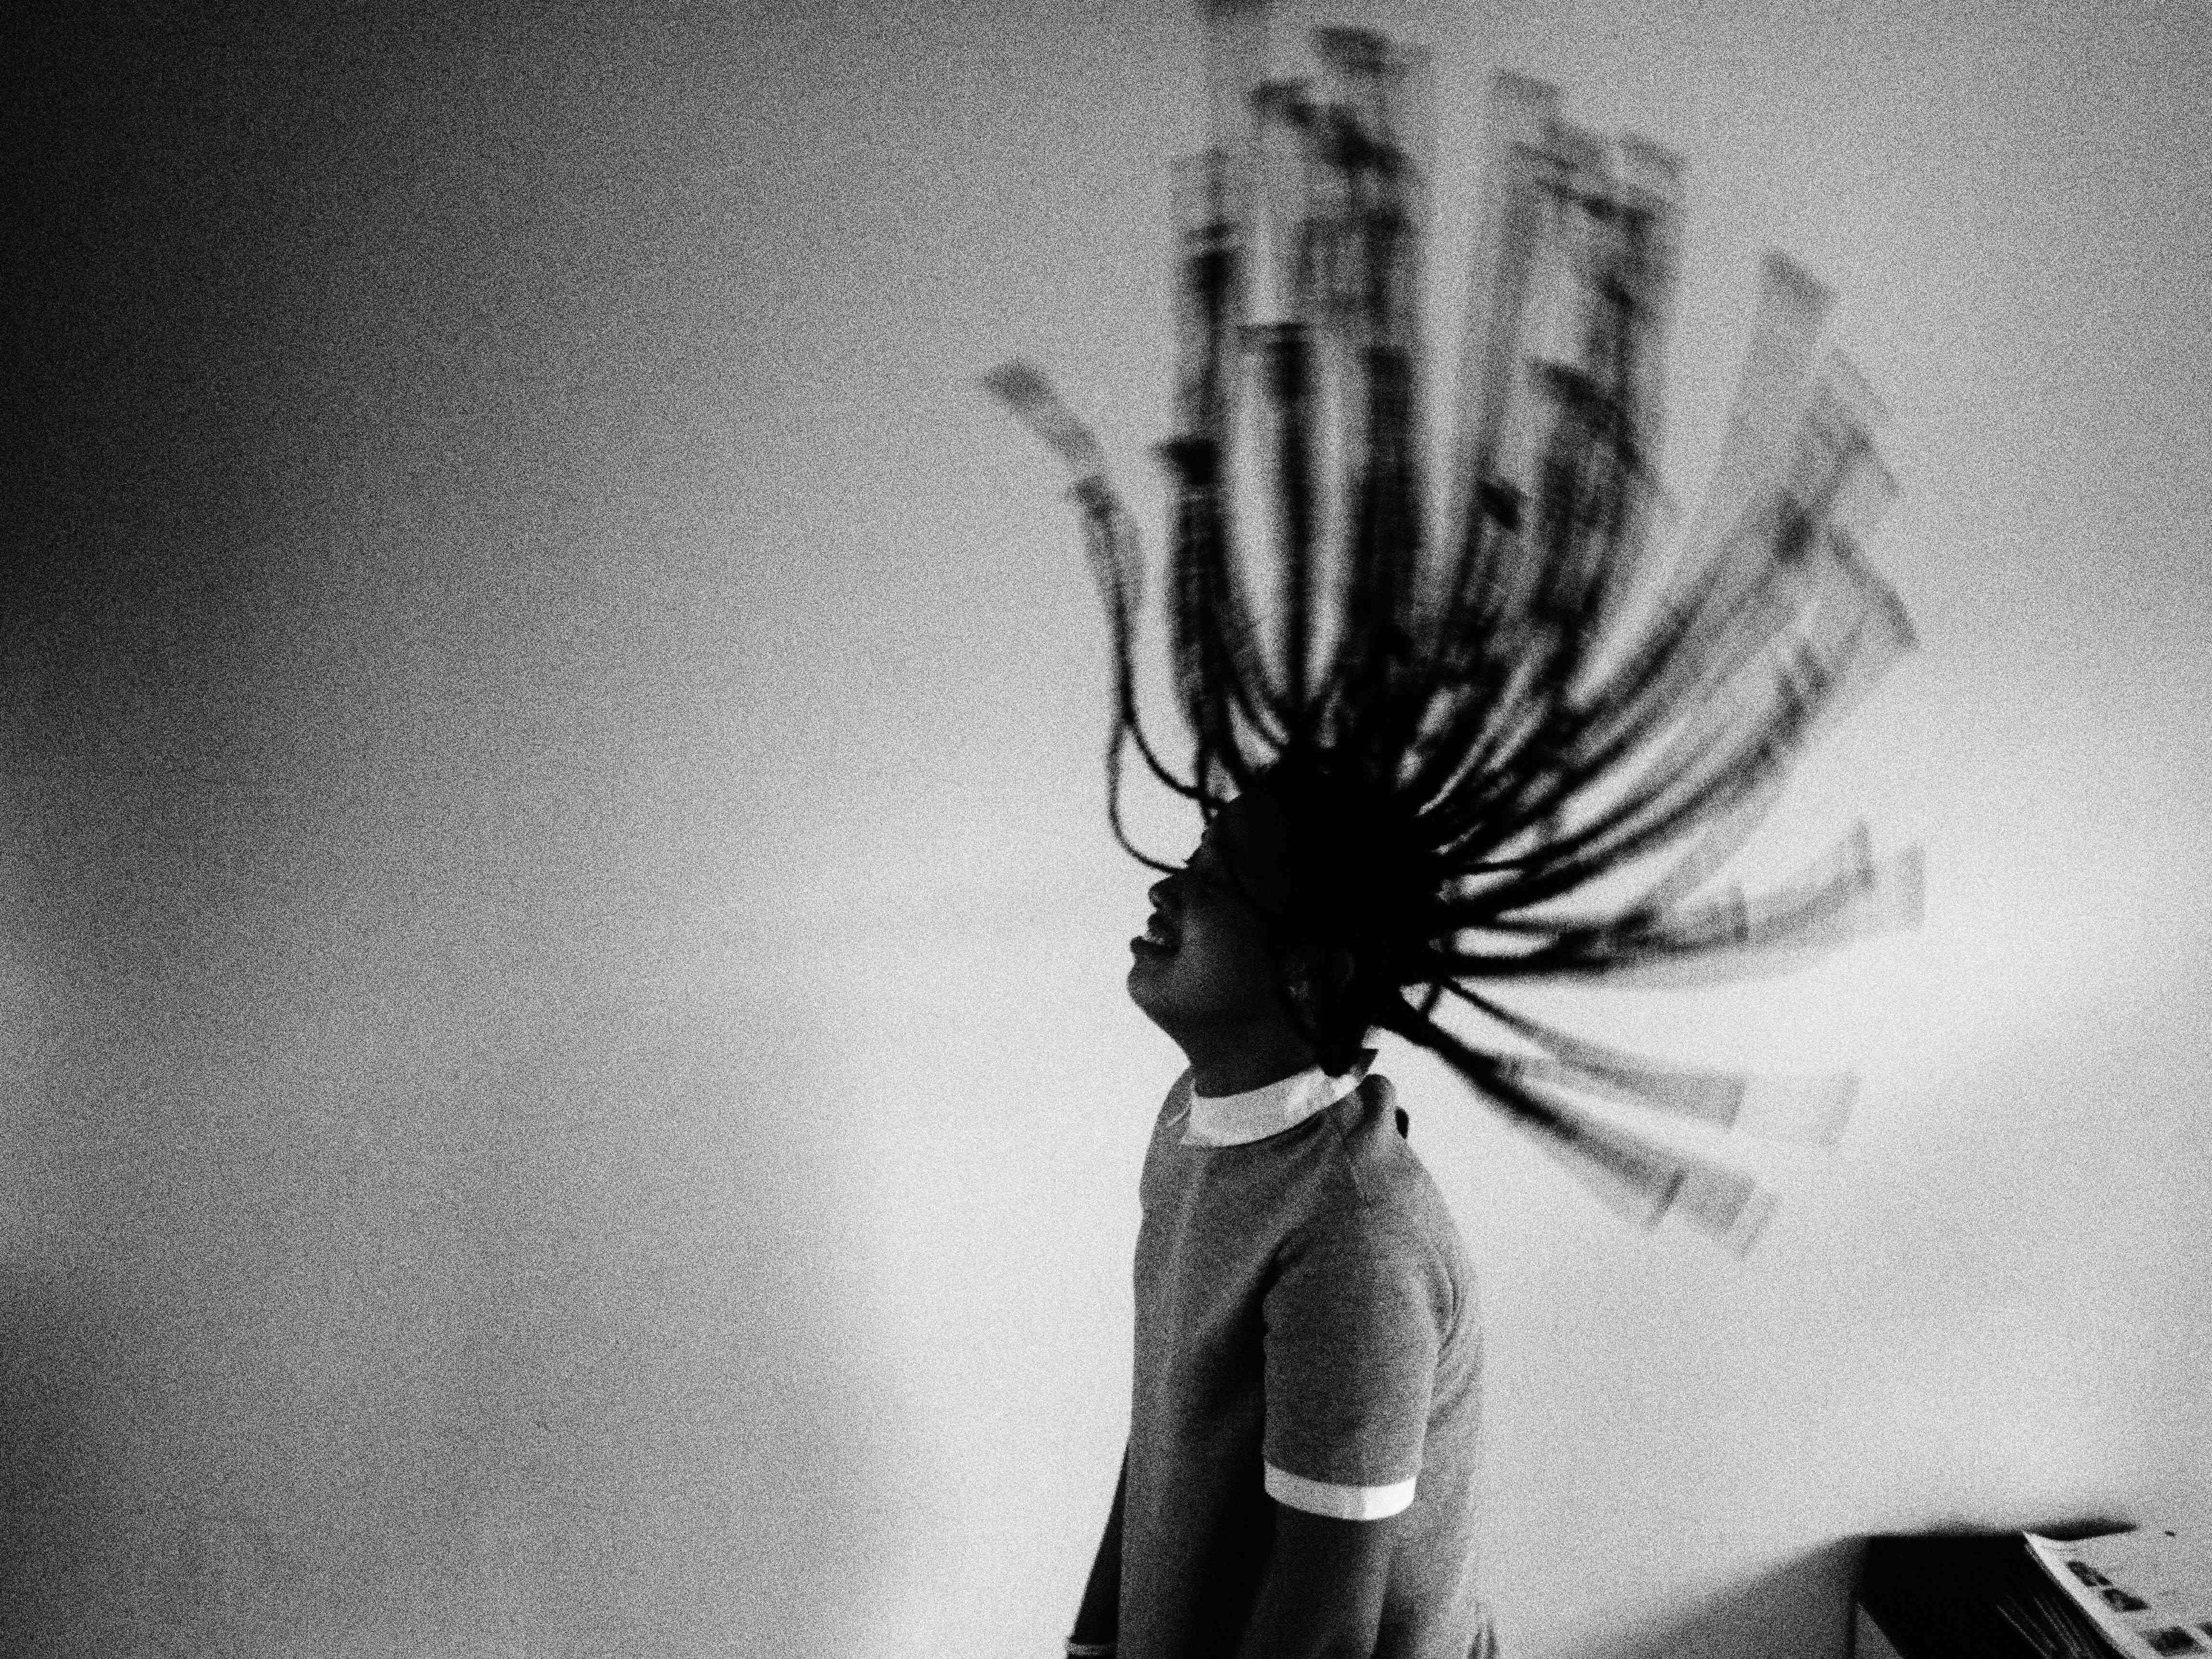 Black and white image of a girl with braids flipping her head